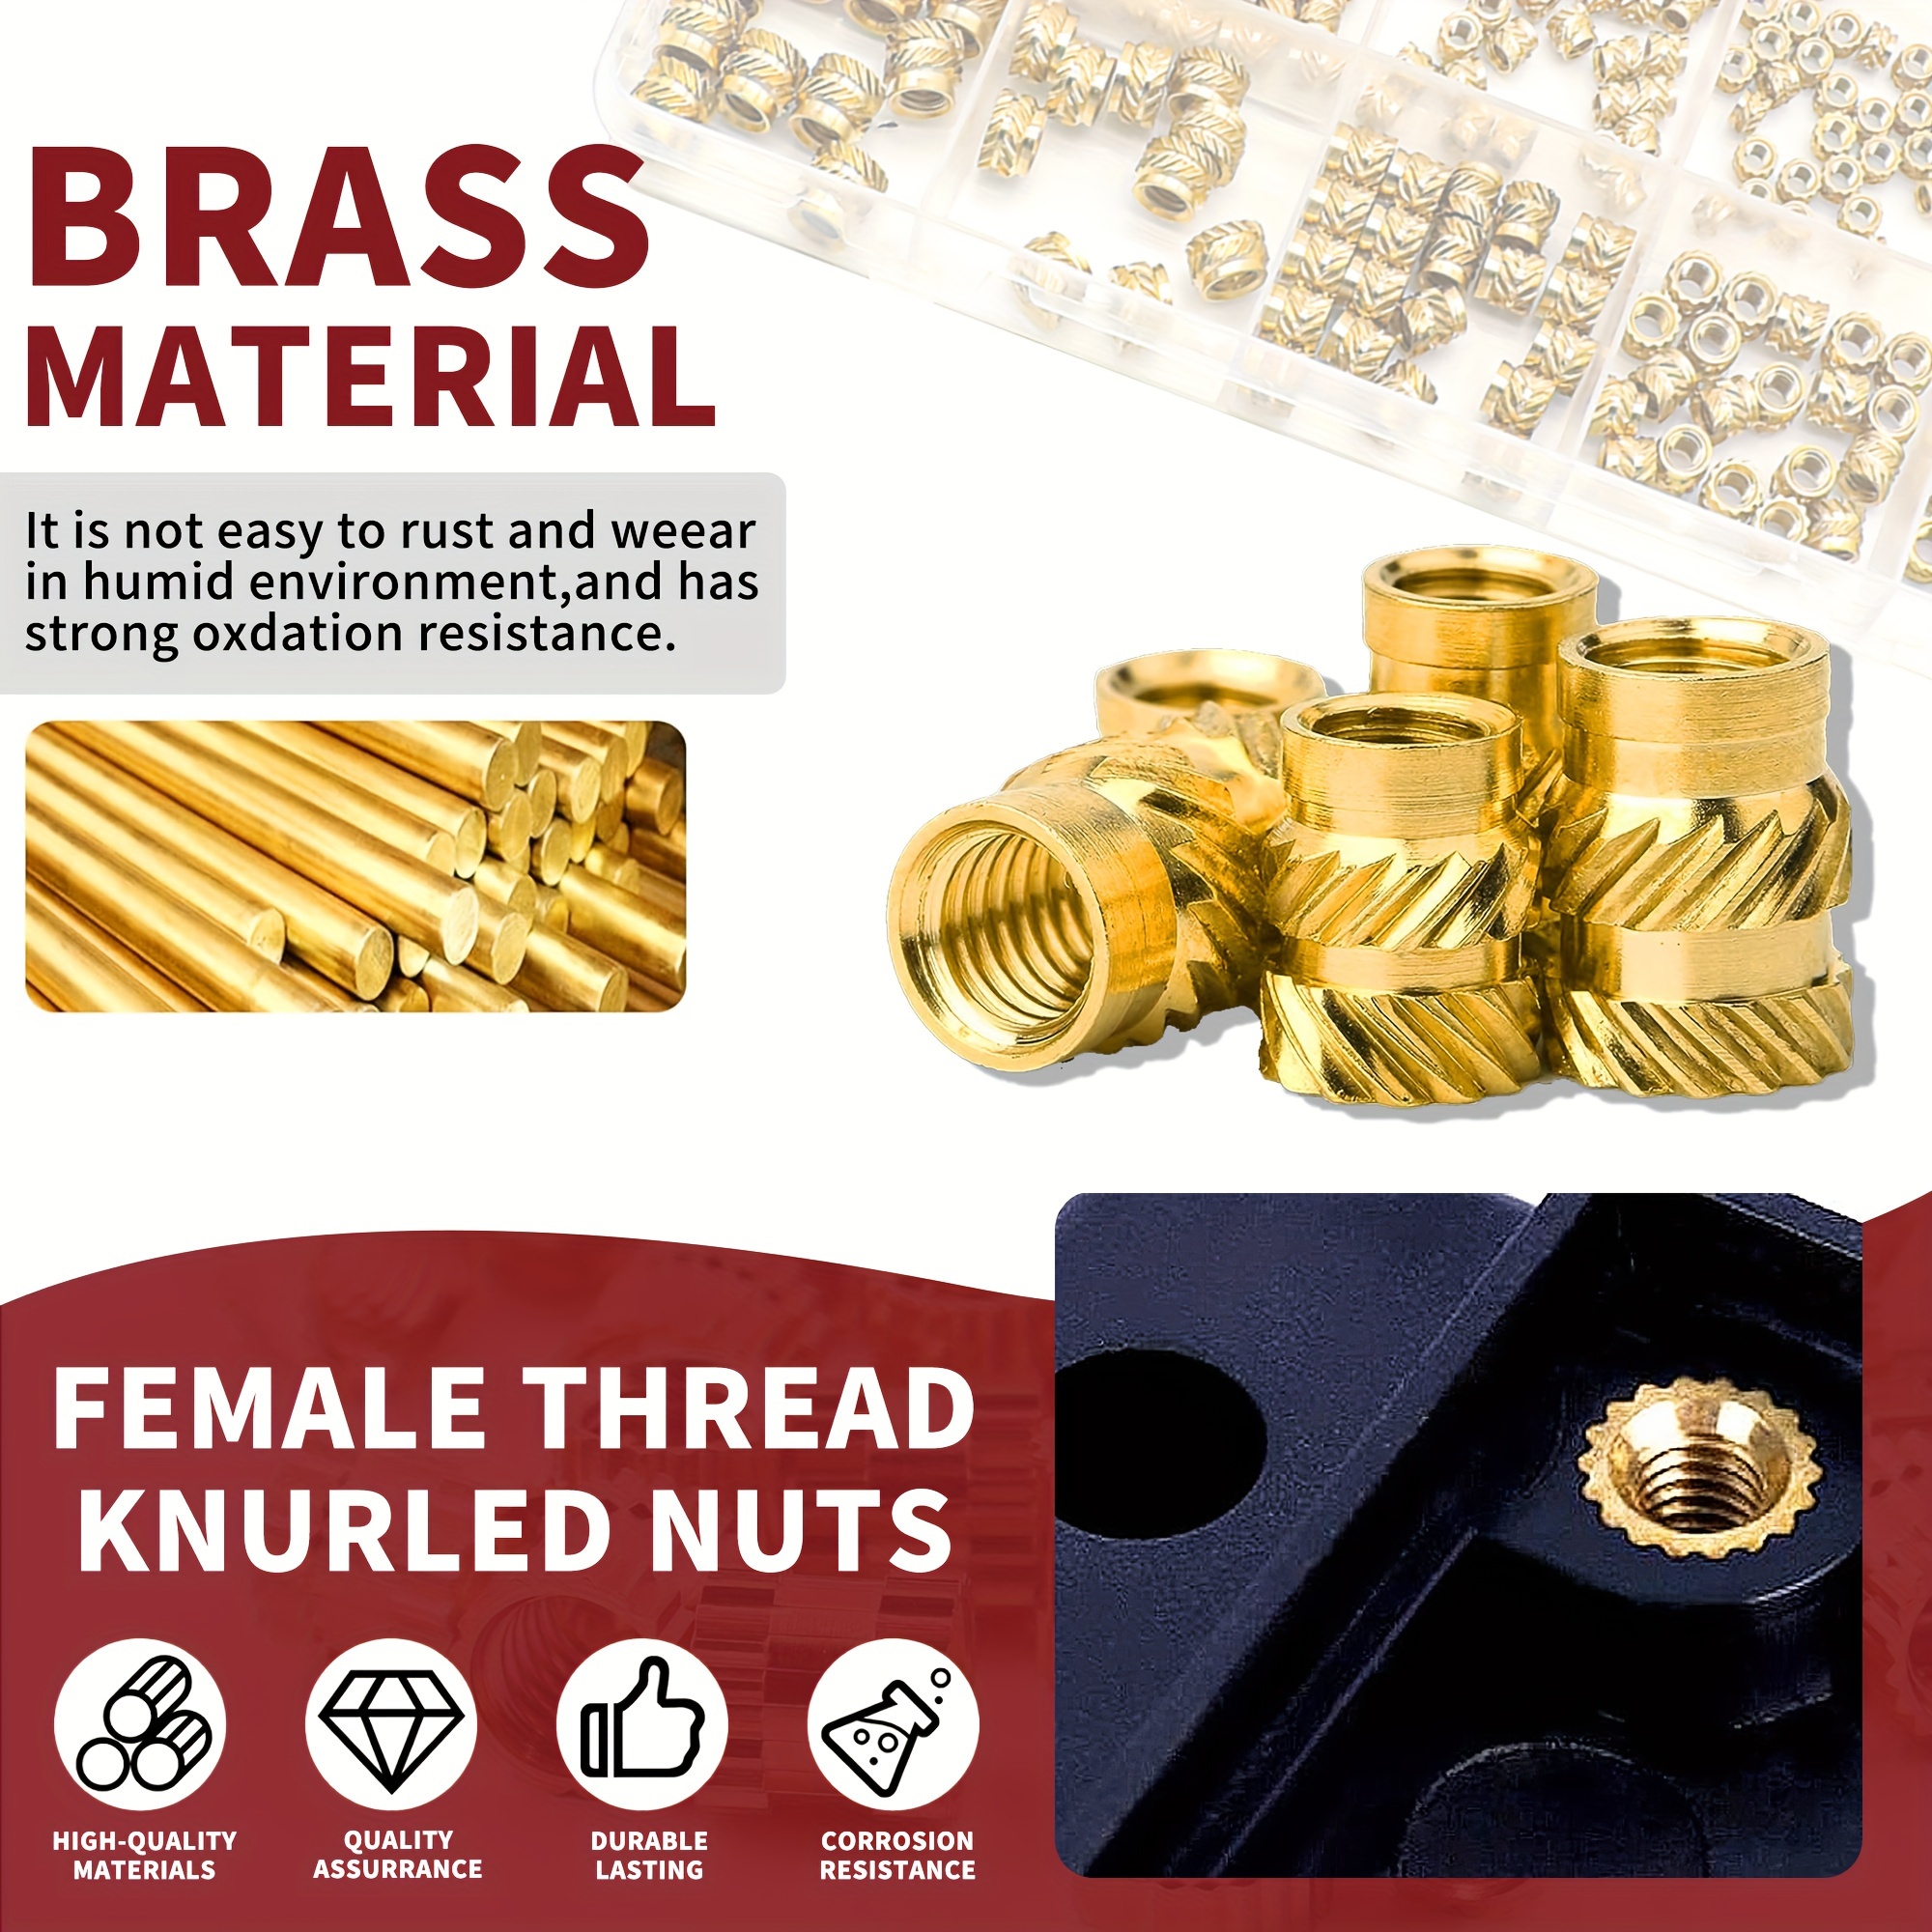 Brass Threaded Insert Assortment Kit Knurled Nuts In 5 Sizes